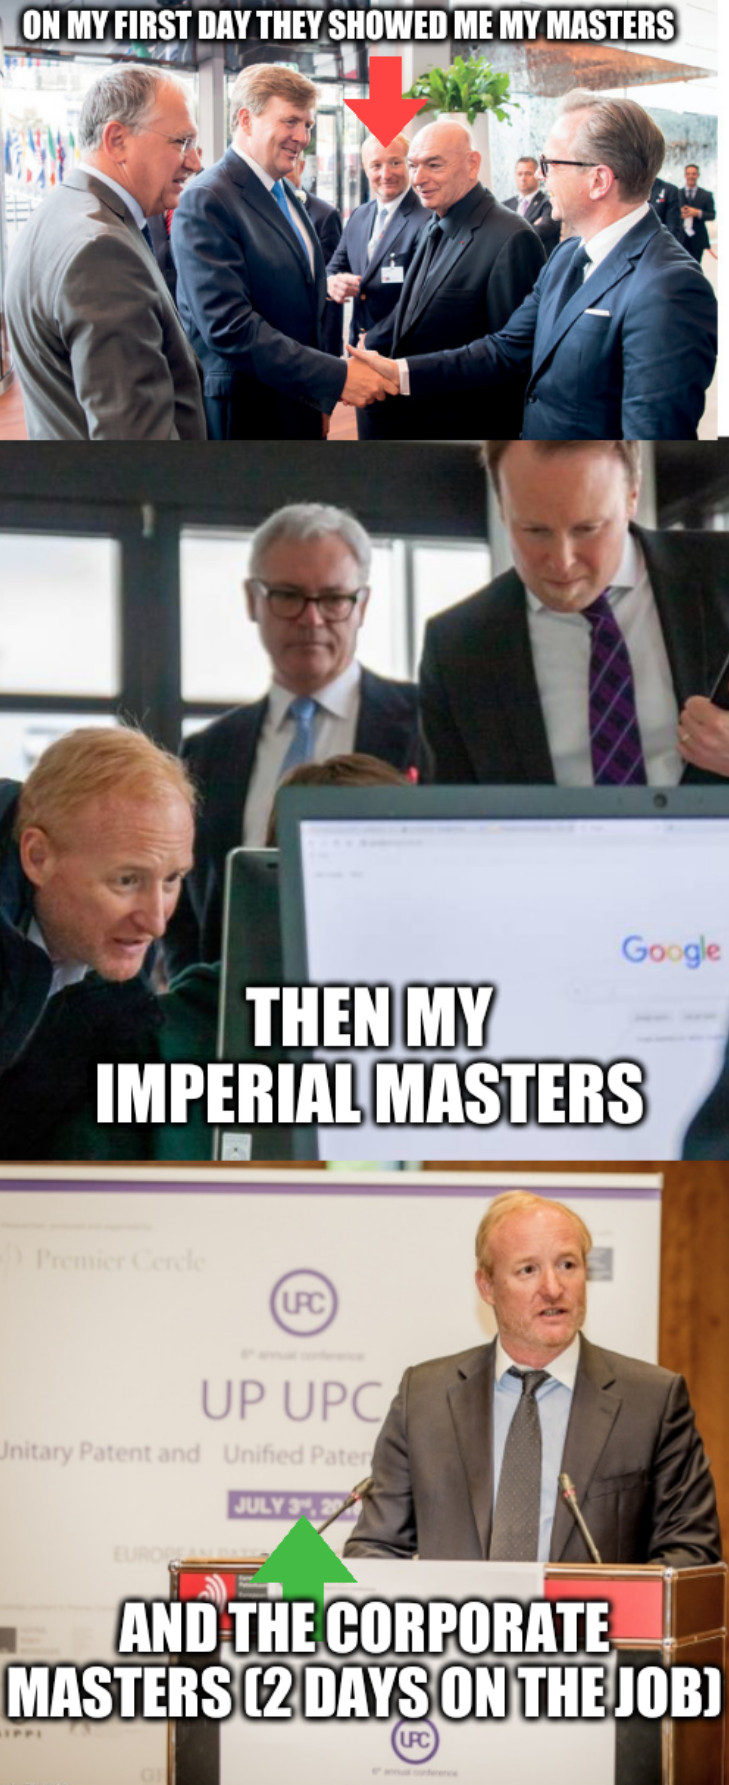 On my first day they showed me my masters. Then my imperial masters. And the corporate masters (2 days on the job).